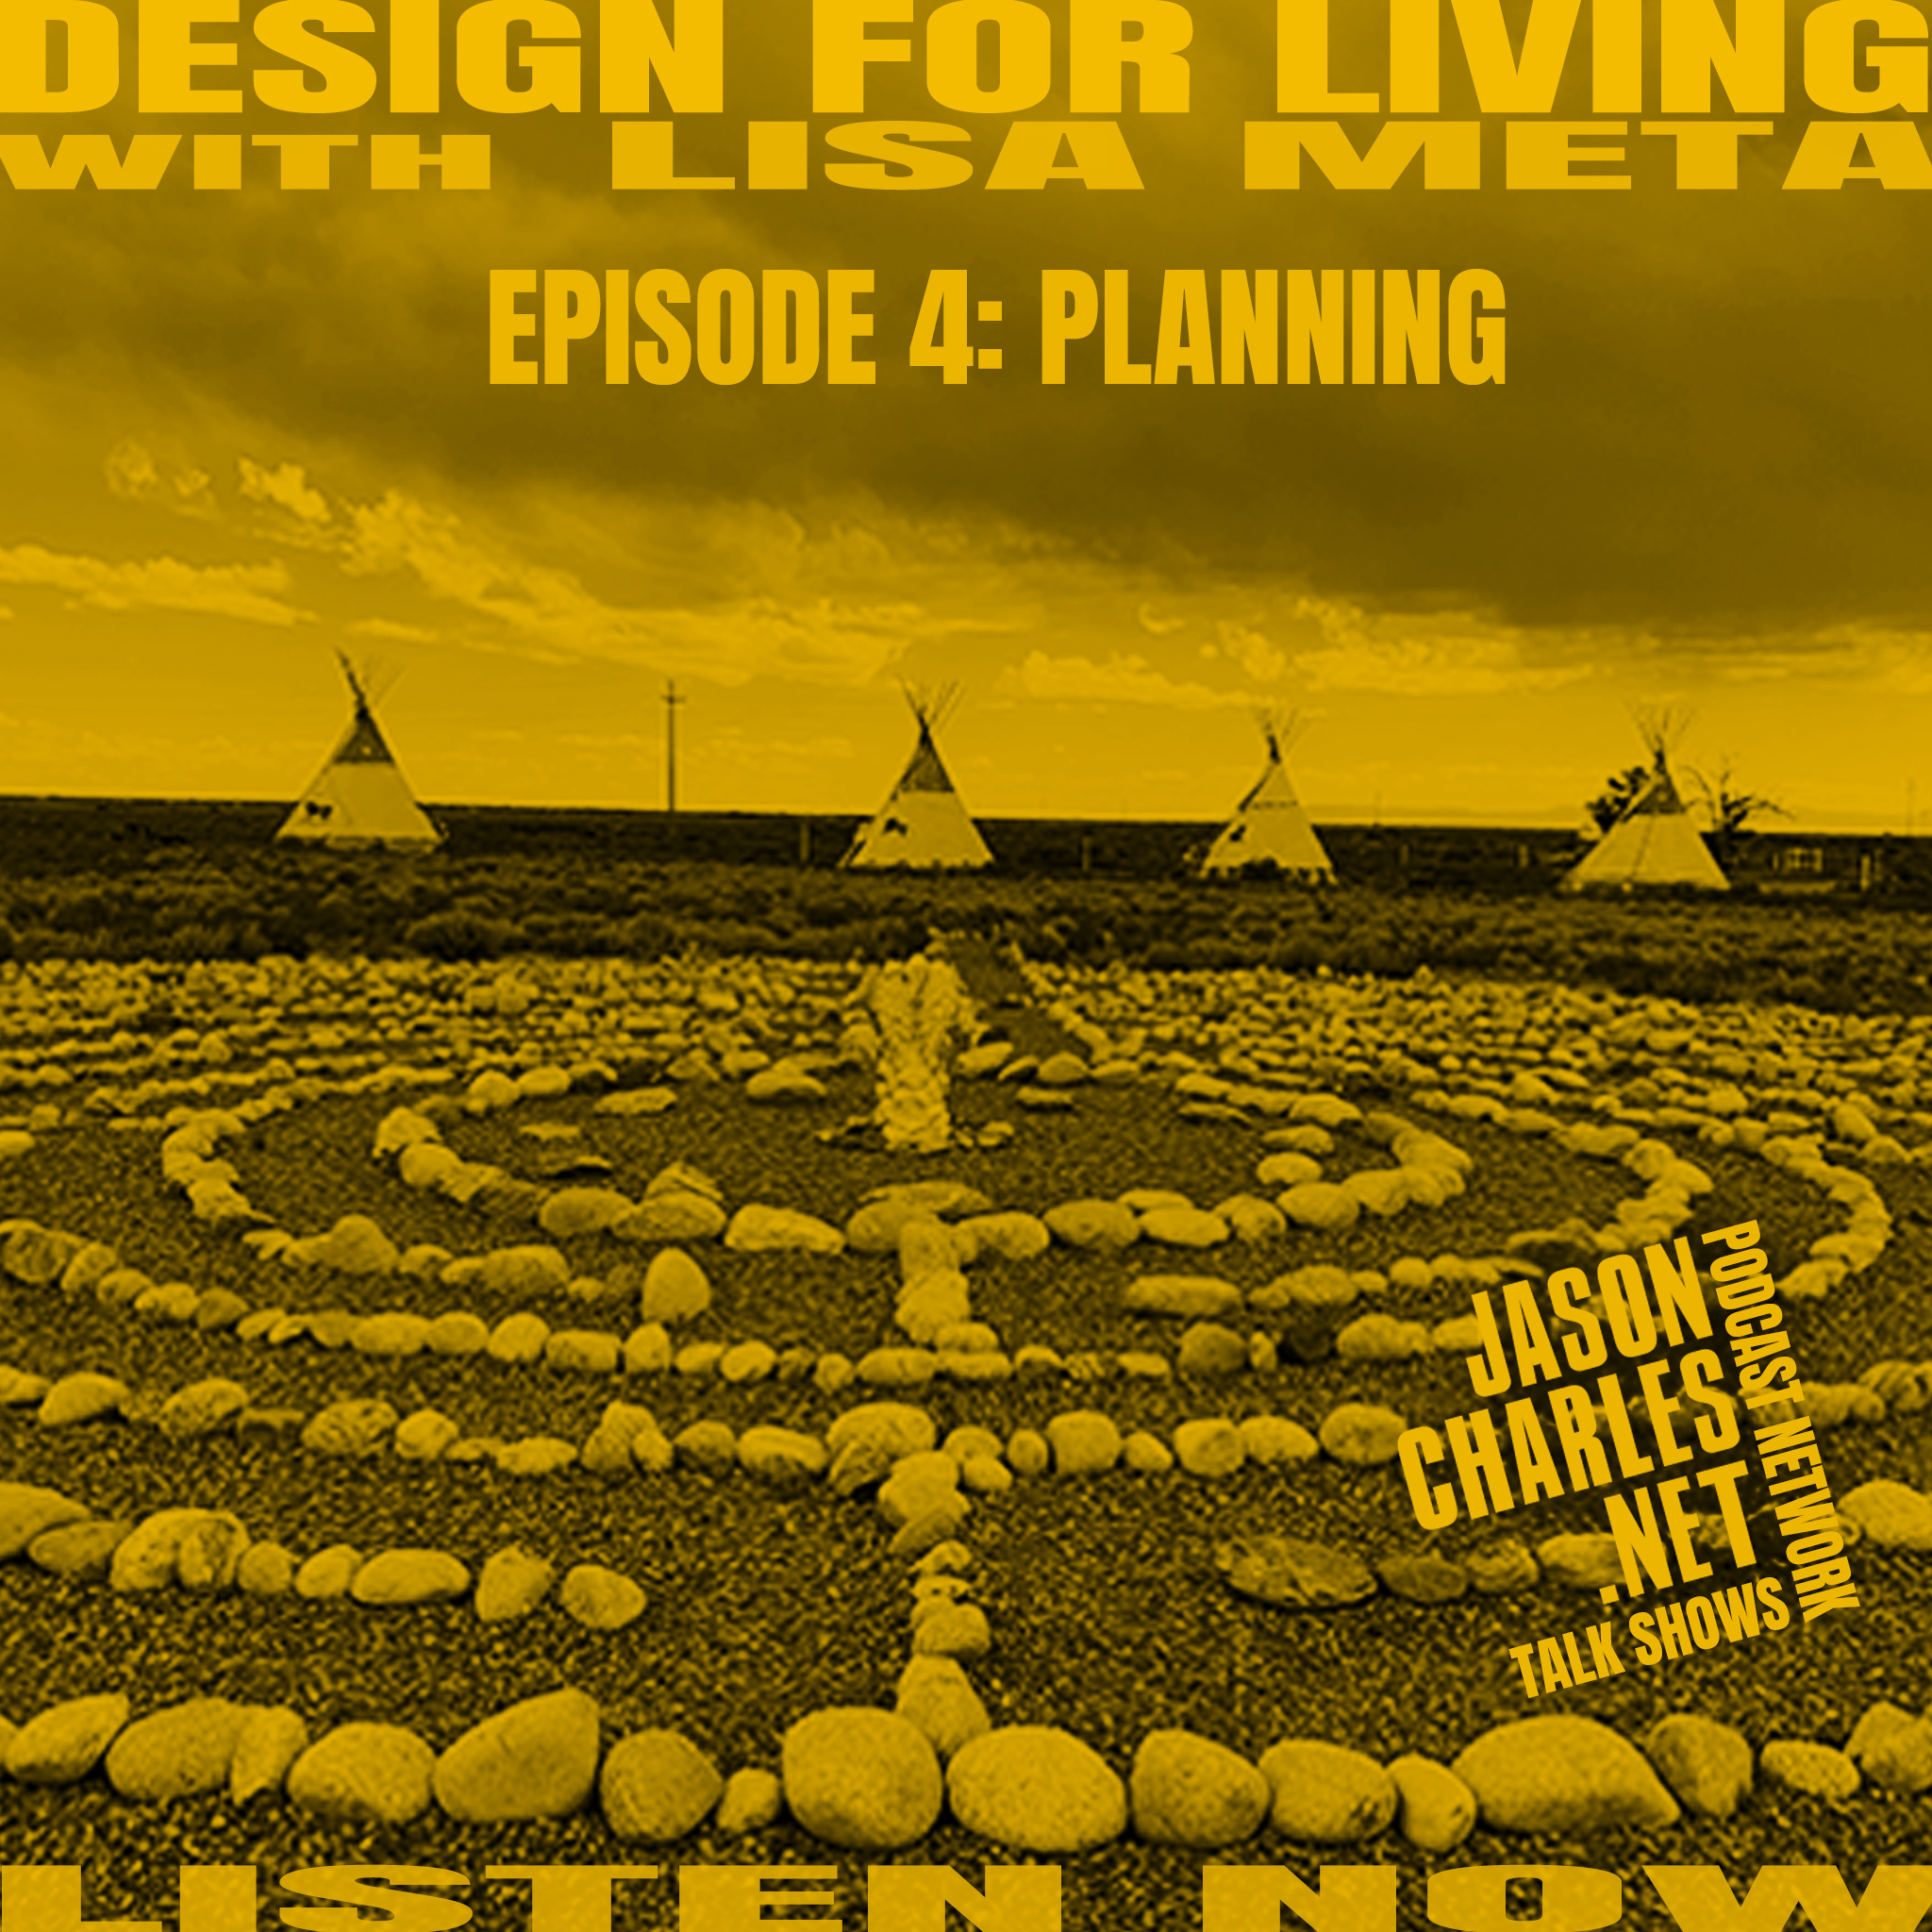 DESIGN FOR LIVING with Lisa Meta Episode 4 PLANNING